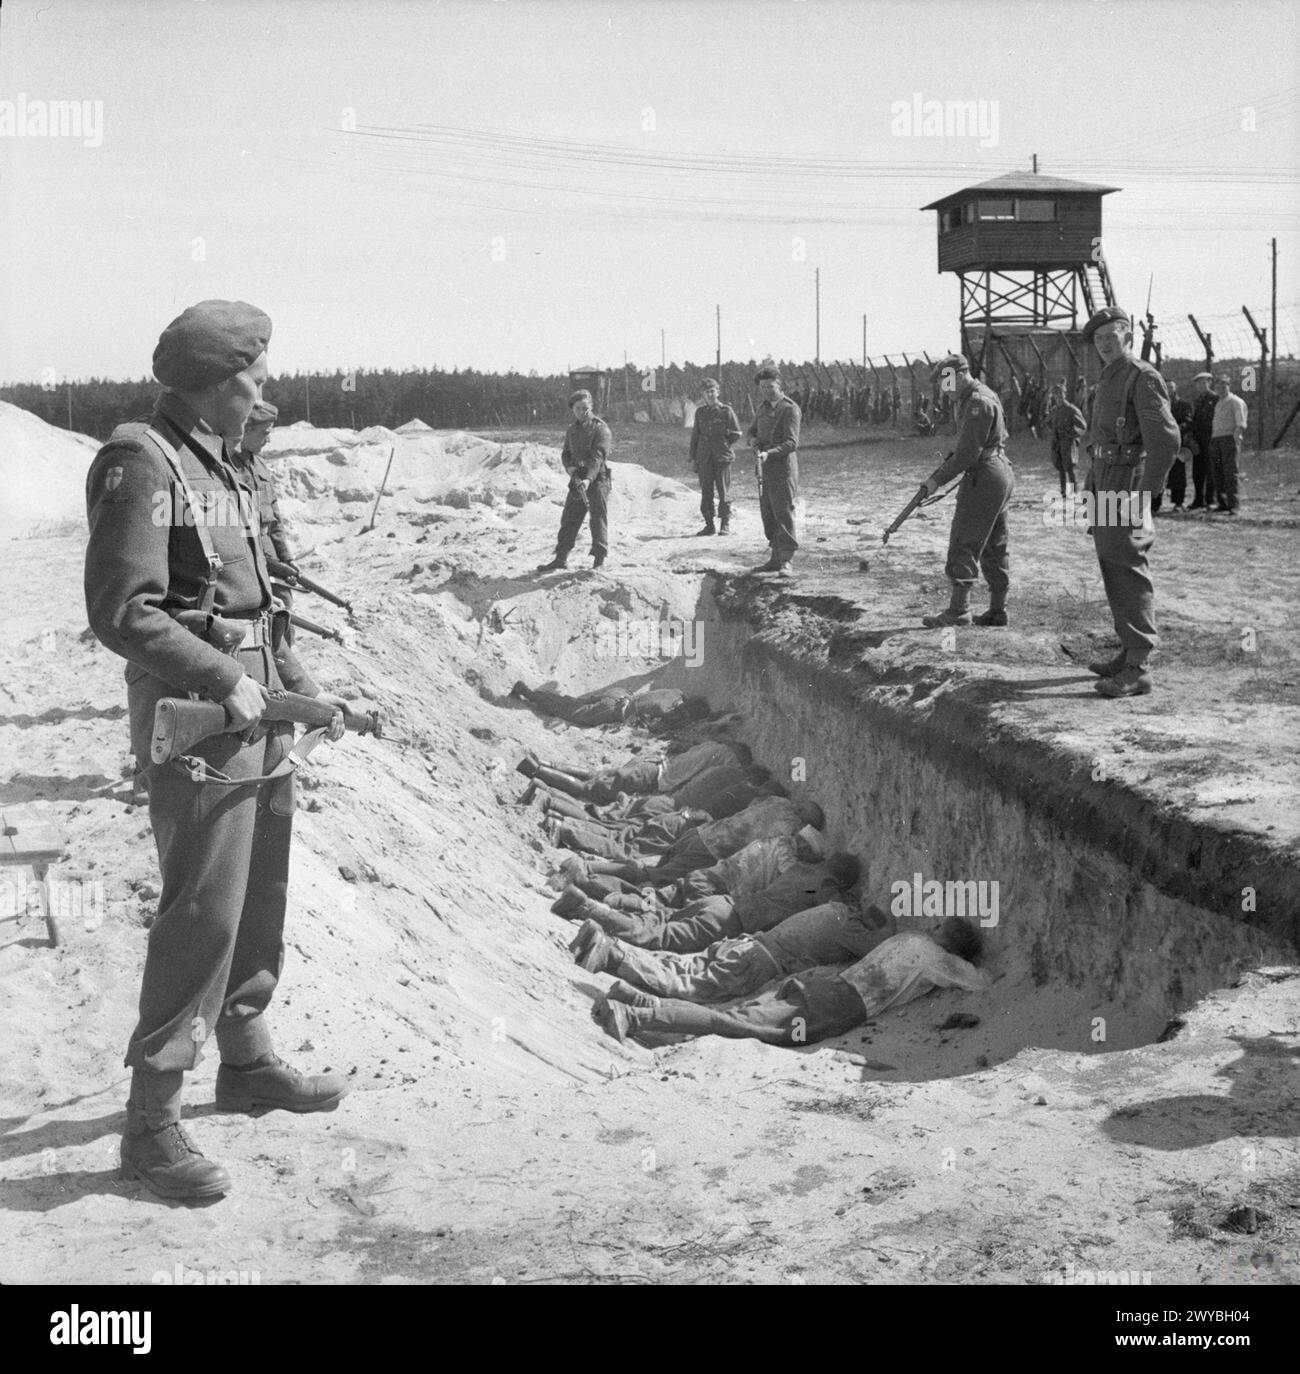 THE LIBERATION OF BERGEN-BELSEN CONCENTRATION CAMP, APRIL 1945 - German SS guards, exhausted from their forced labour clearing the bodies of the dead, are allowed a brief rest by British soldiers but are forced to take it by lying face down in one of the empty mass graves, 20 April 1945. , British Army Stock Photo